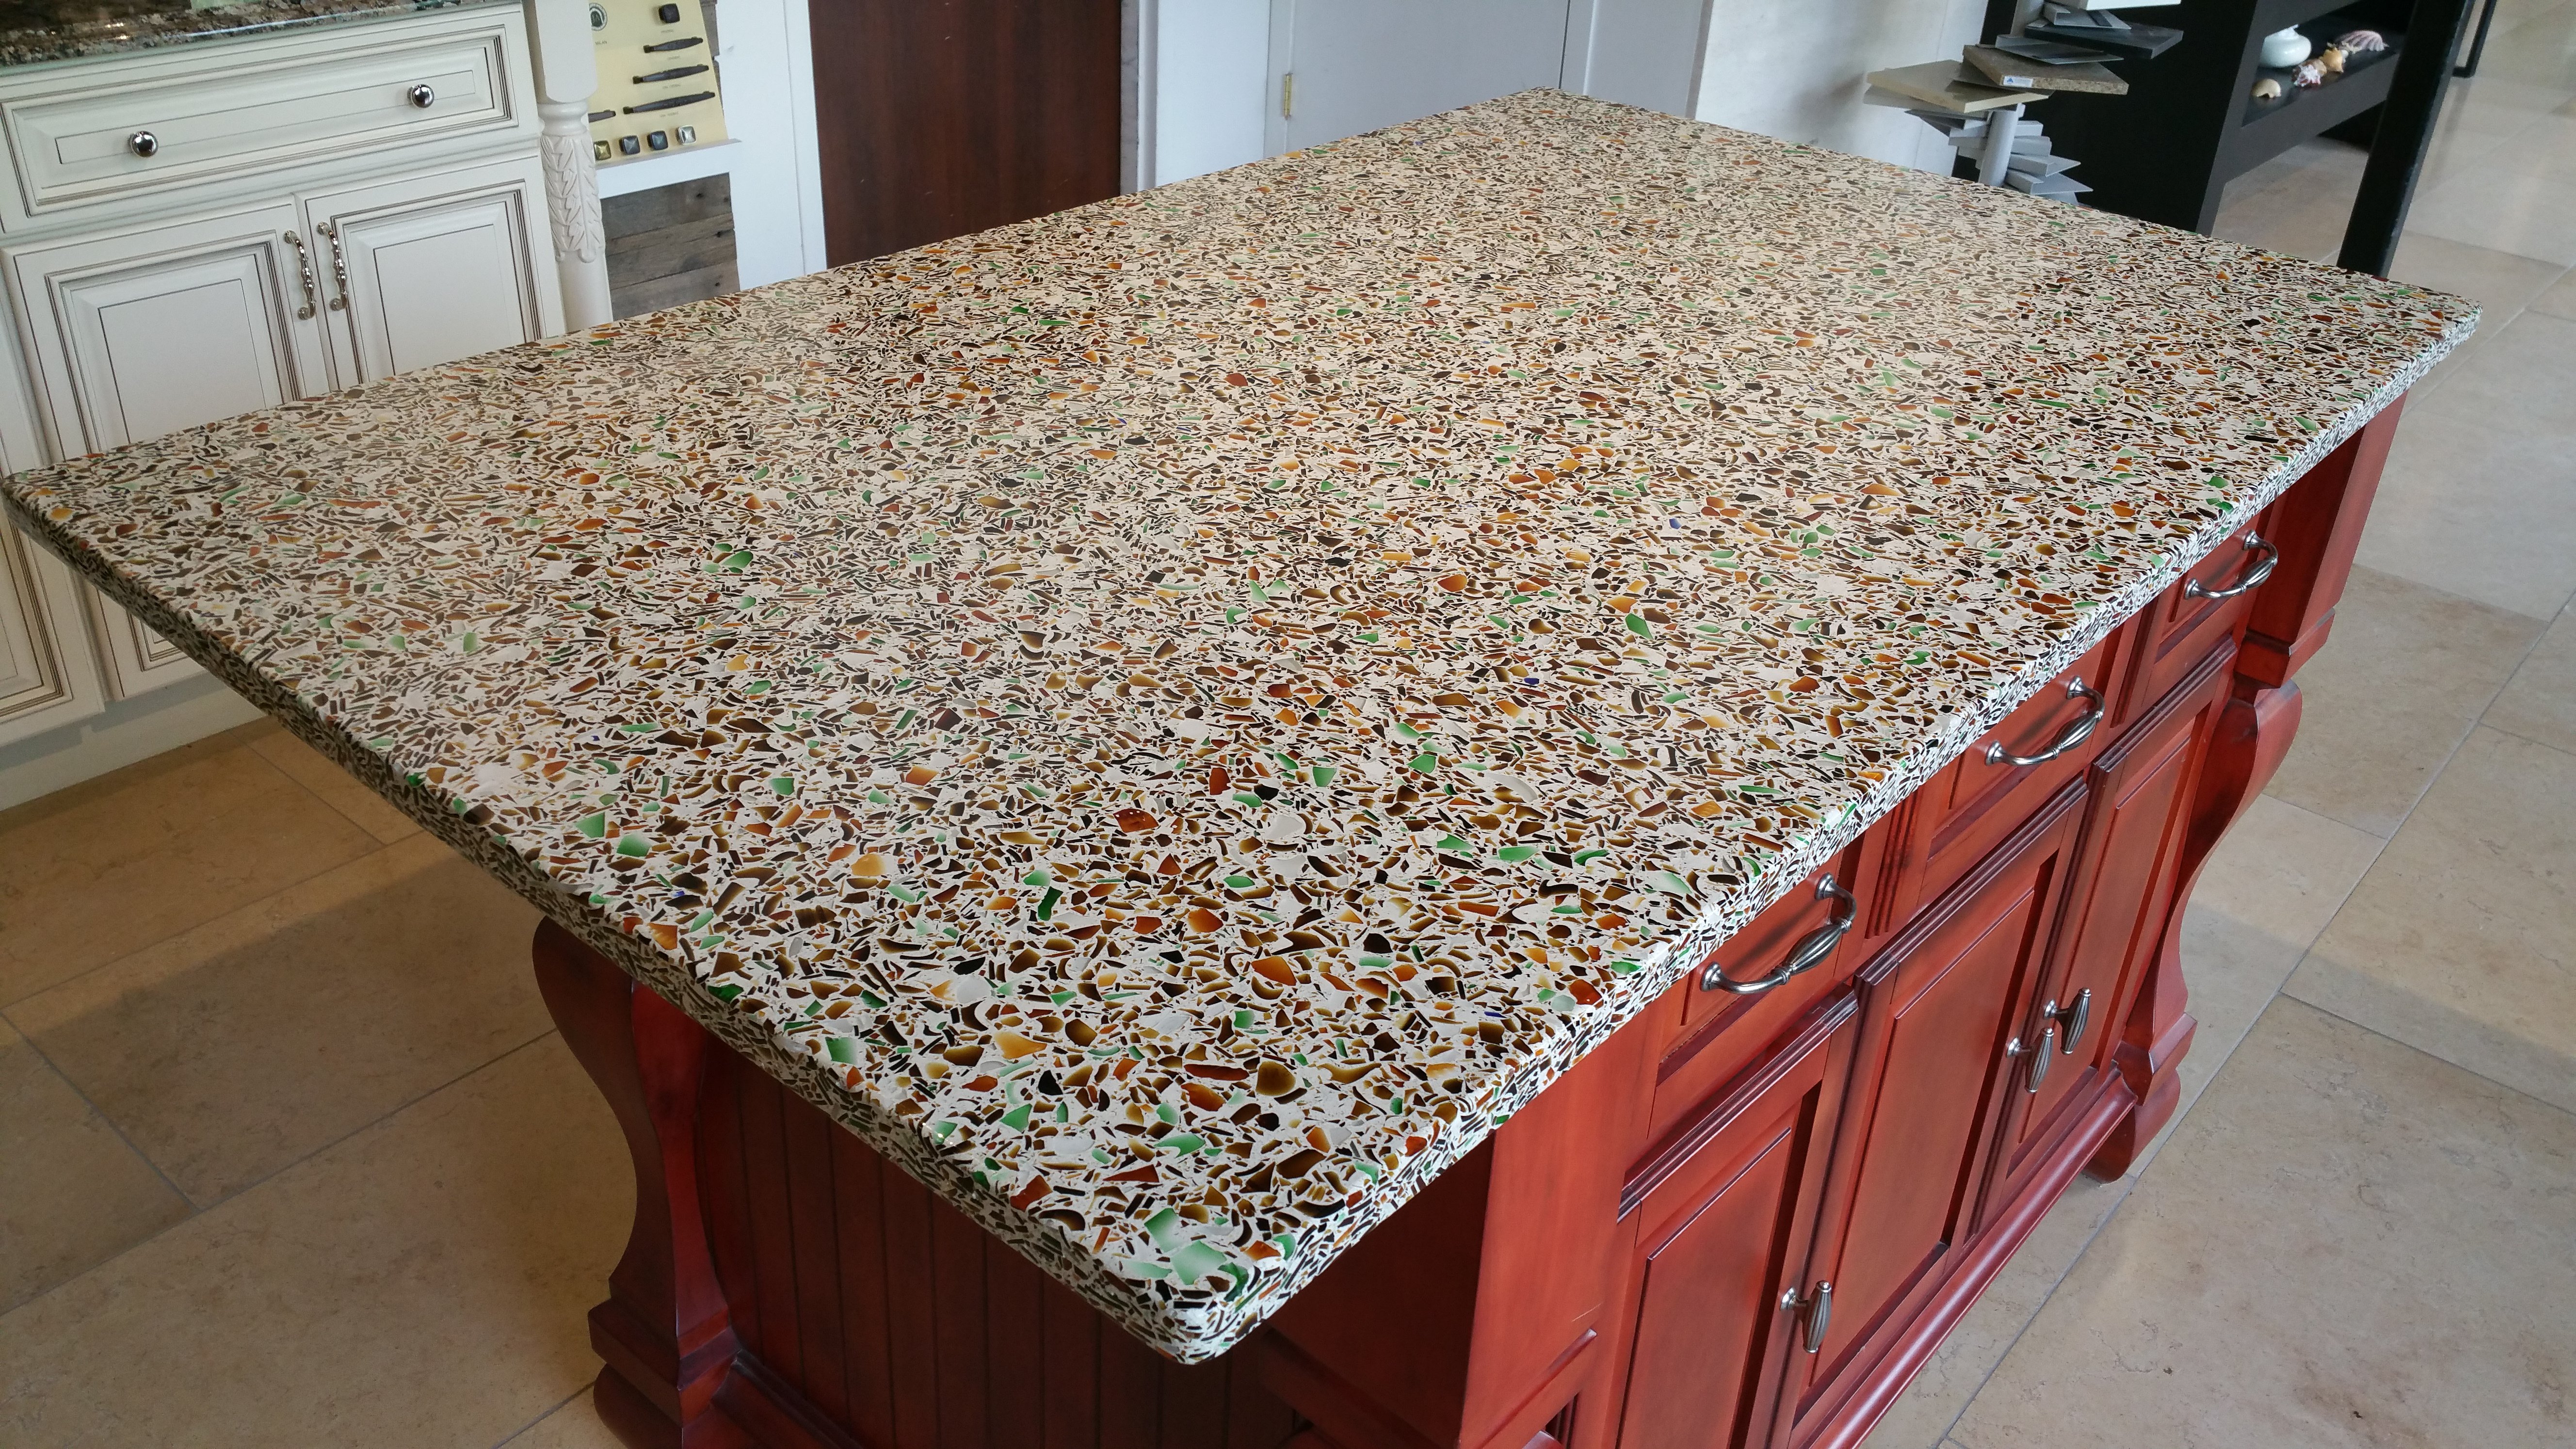 Recycled Glass Countertops Styles, How To Install Glass Countertops